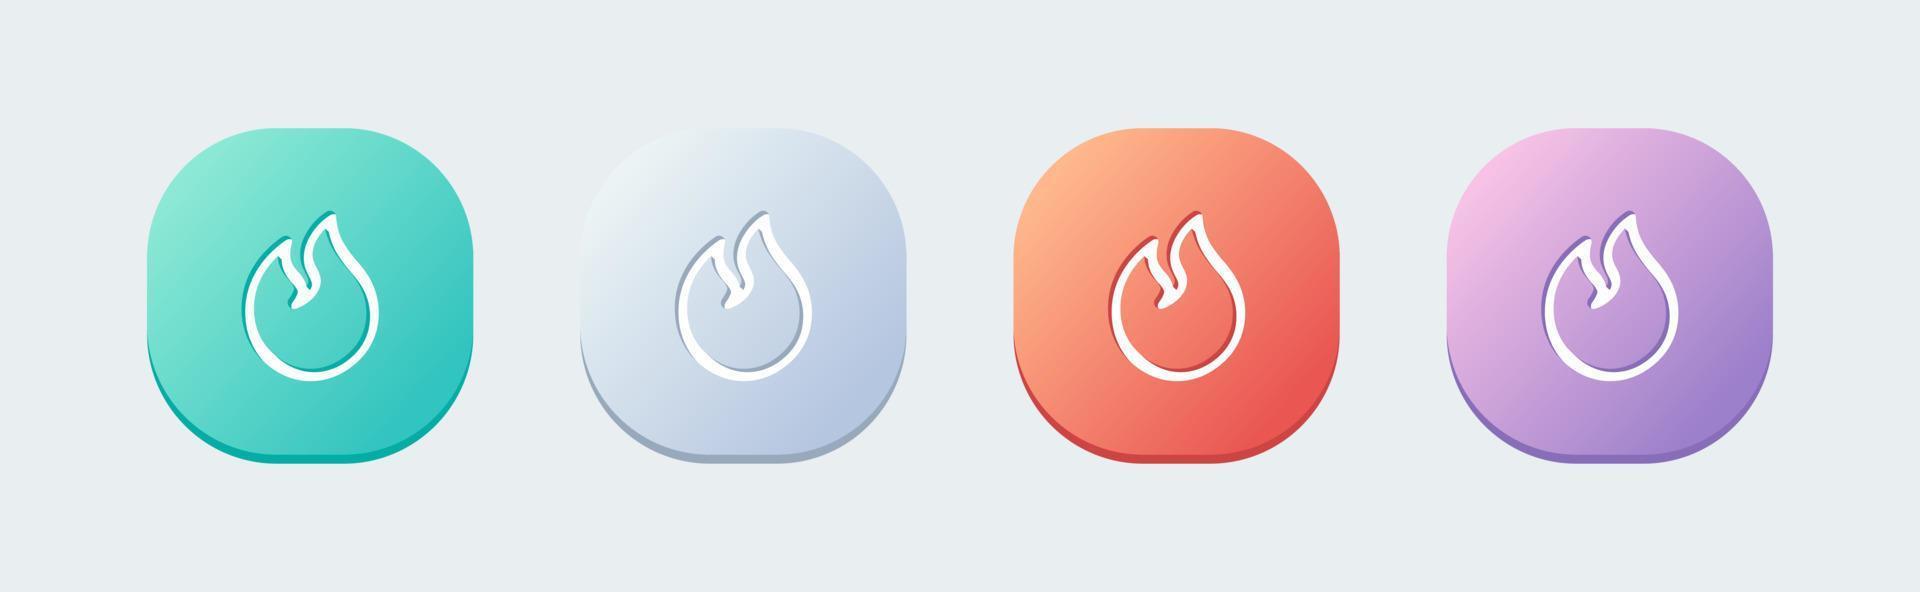 Flame line icon in flat design style. Fire signs vector illustration.